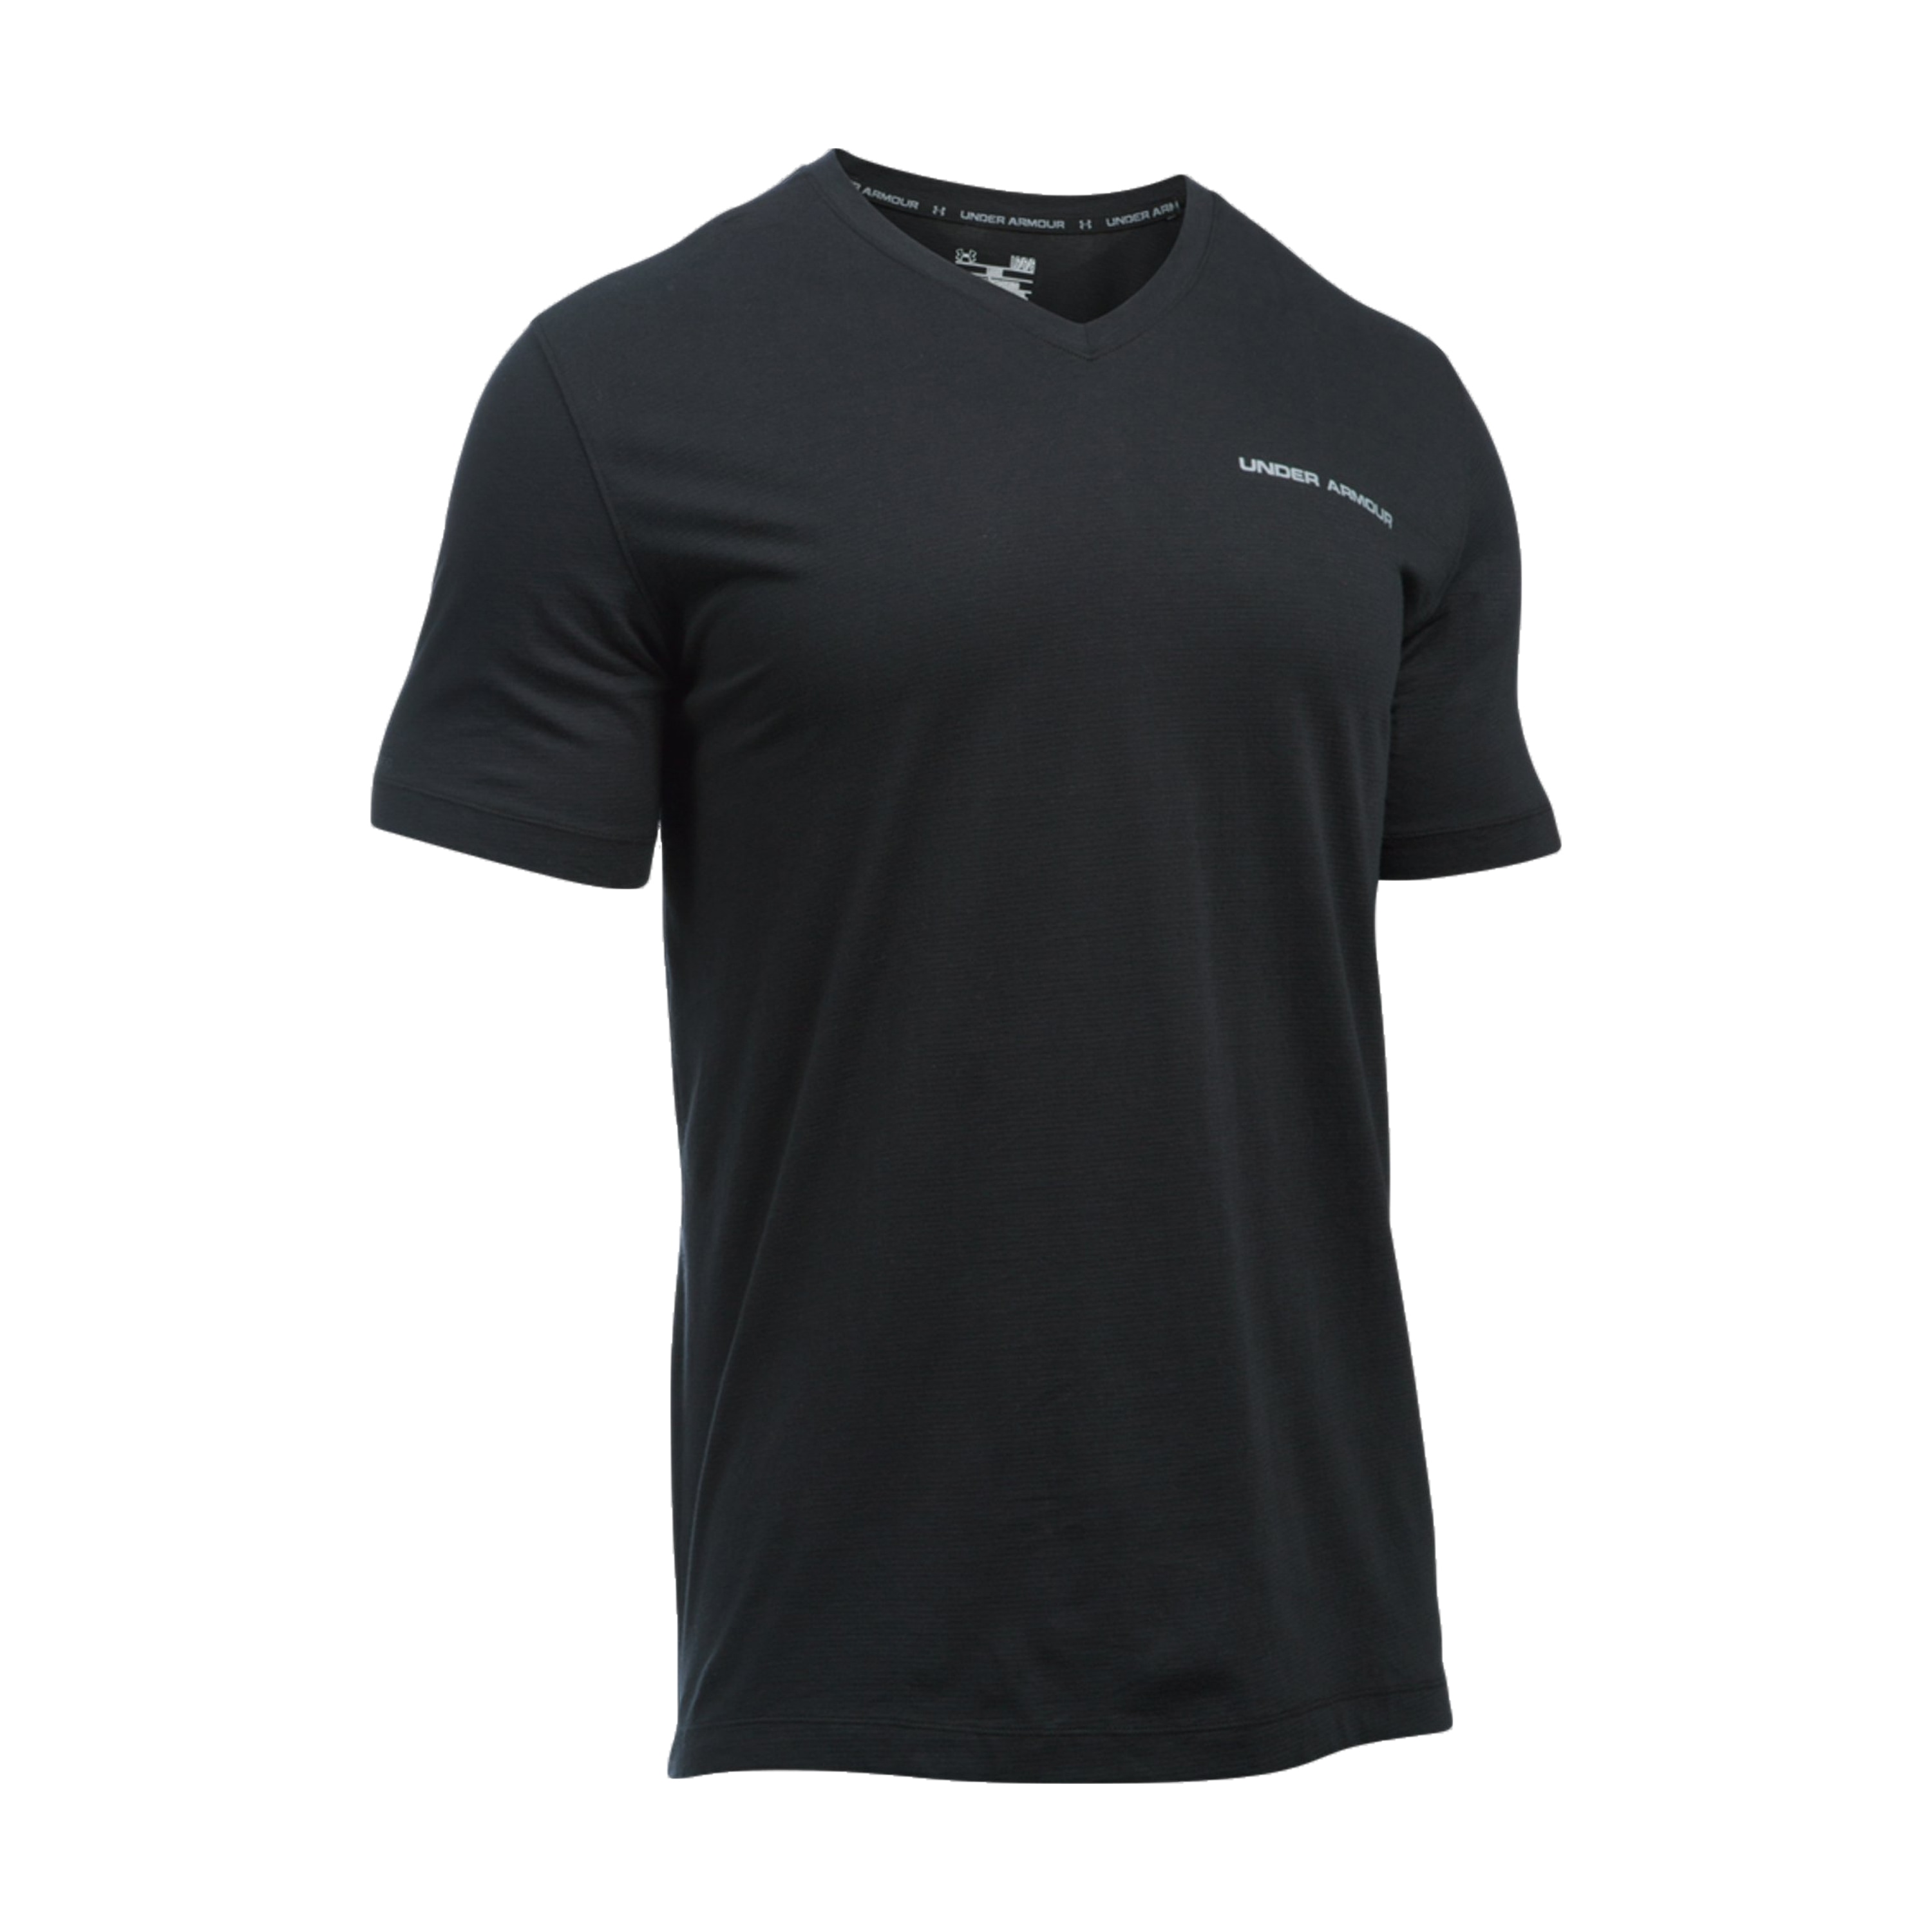 pasta codo valor Under Armour T-Shirt V-Neck Charged Cotton black